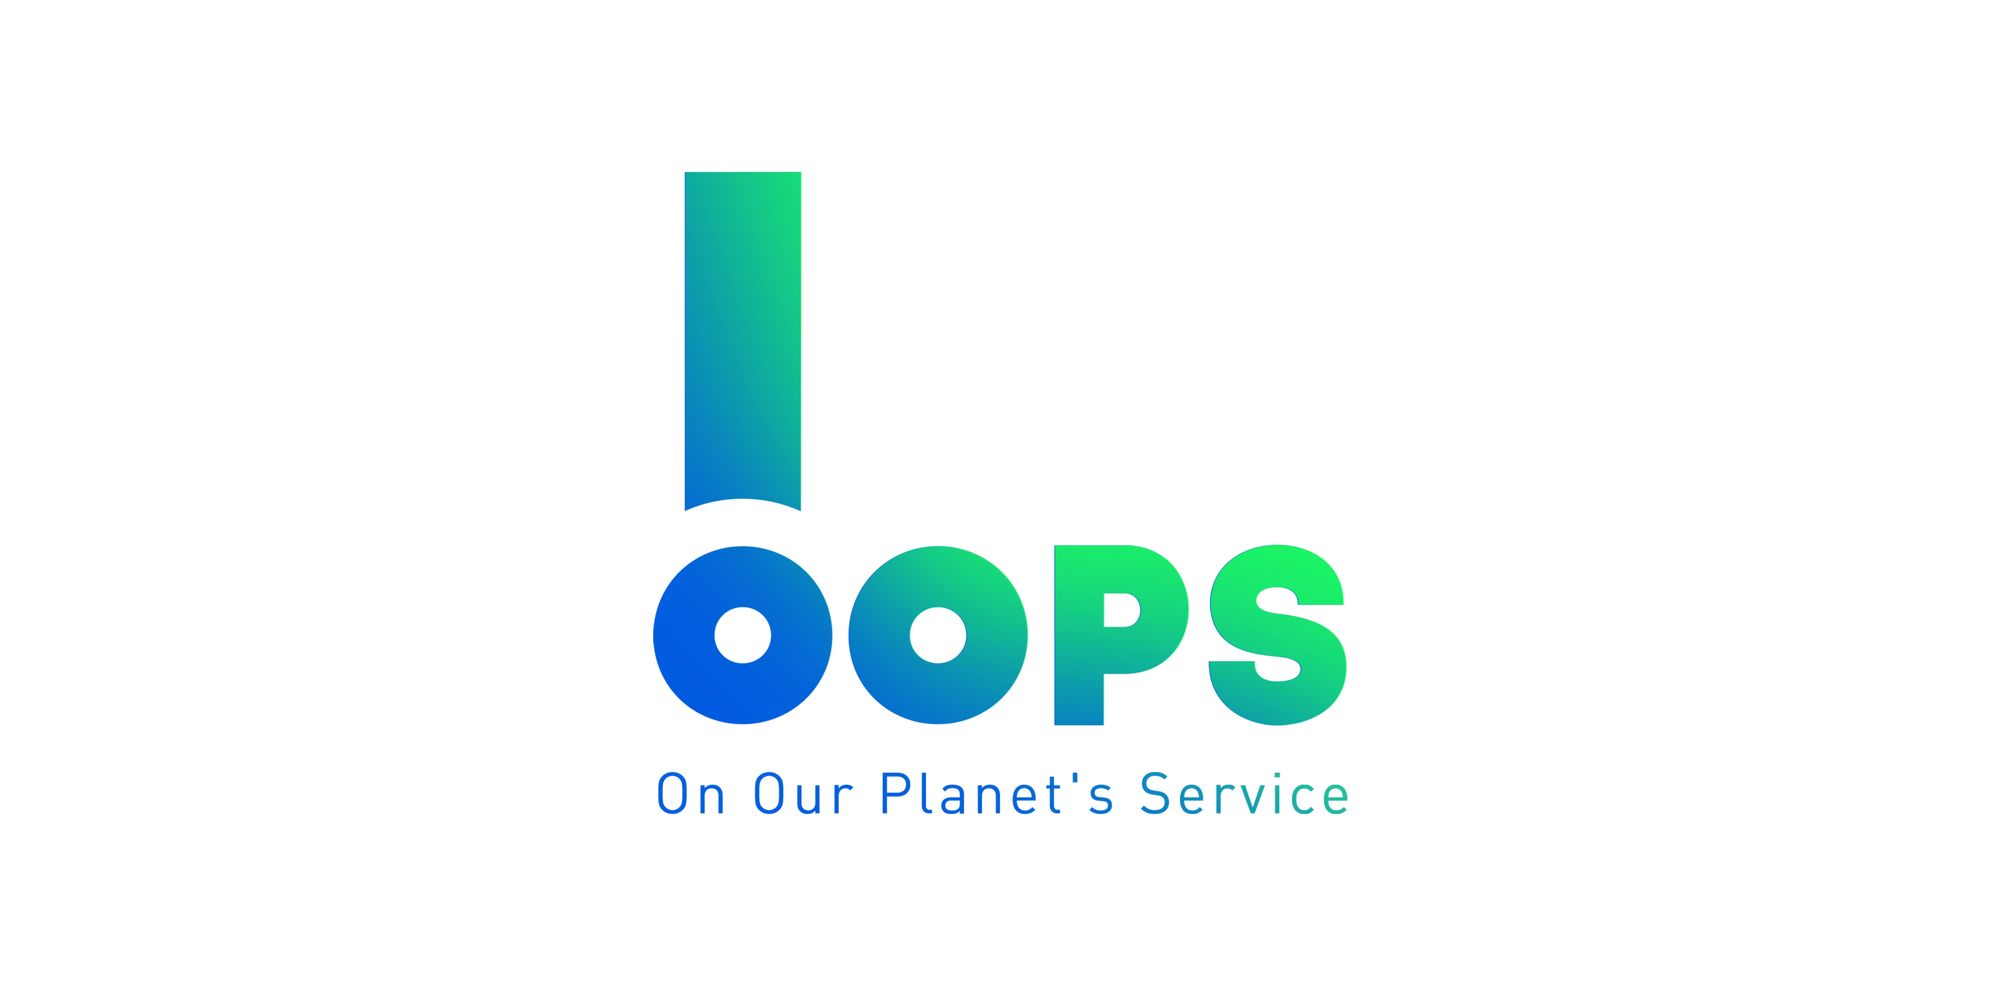 On Our Planet’s Service 